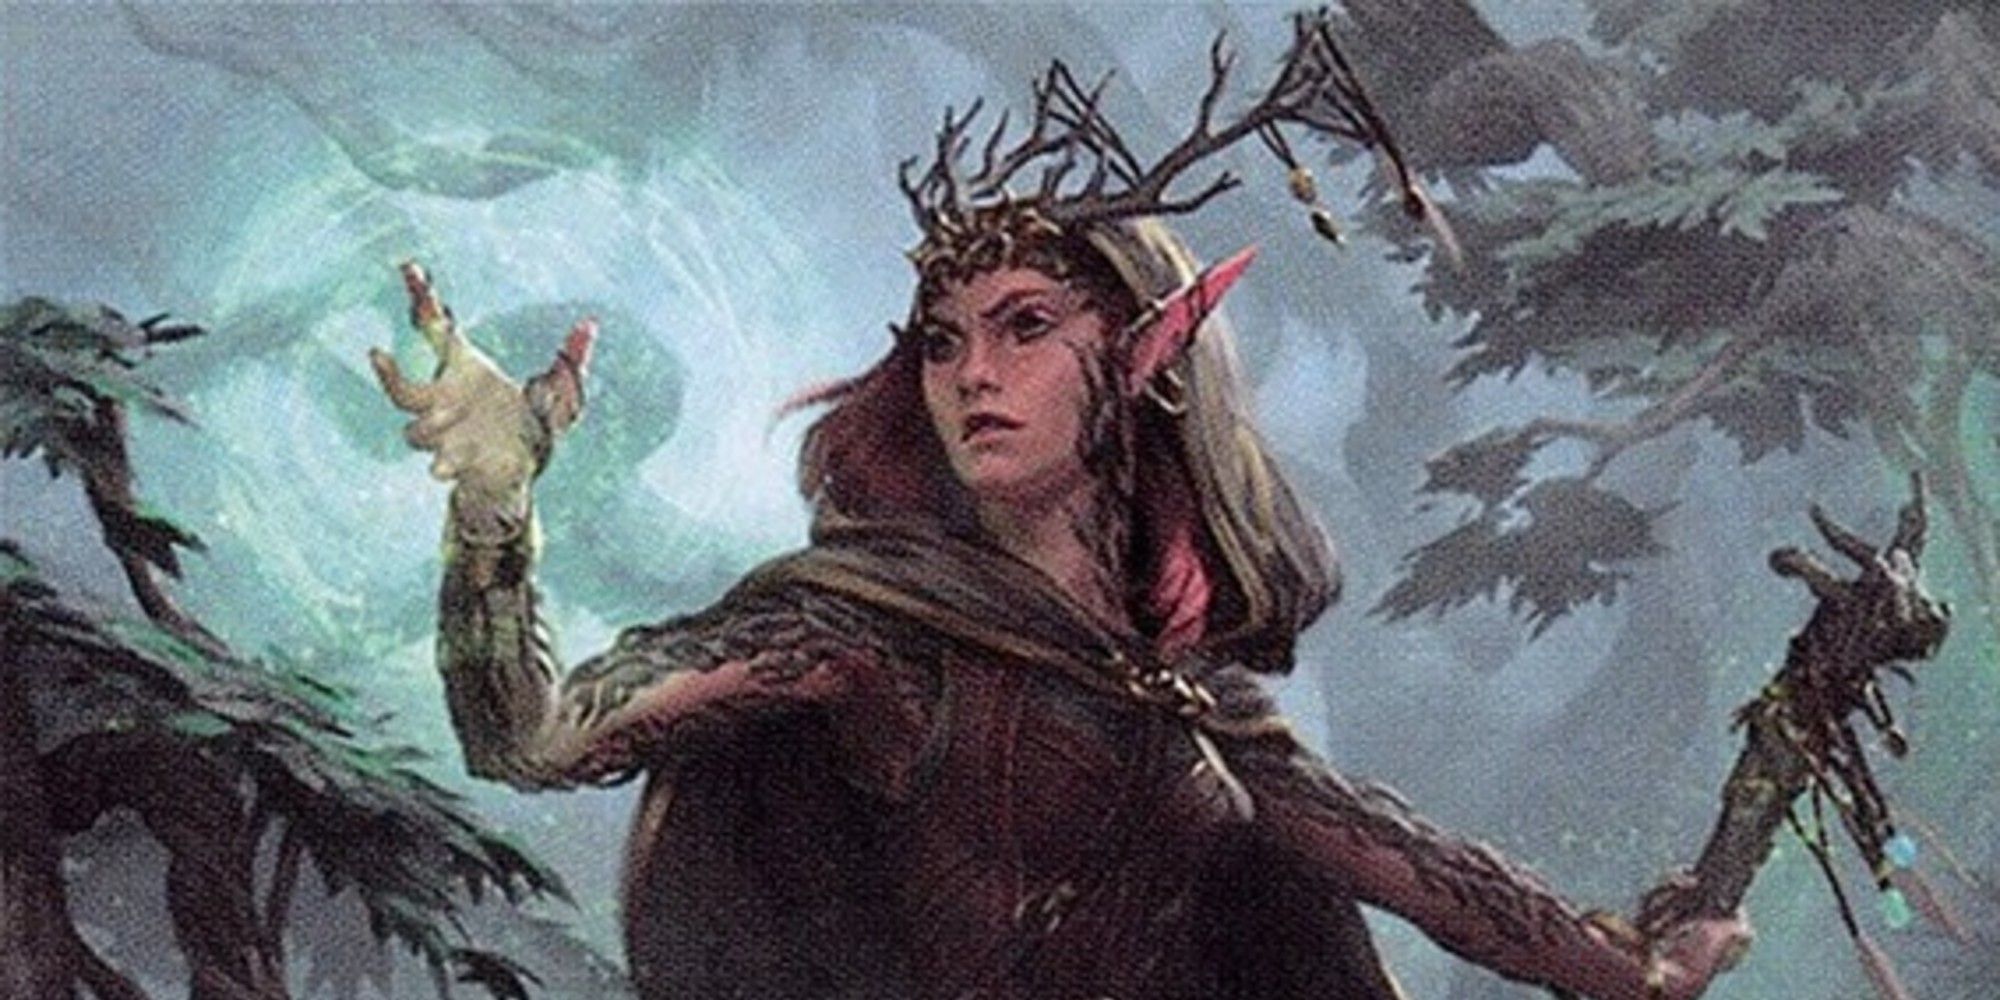 A Circle of Stars D&D druid, wearing an antler-like headpiece and casting magic with a green aura in one hand.